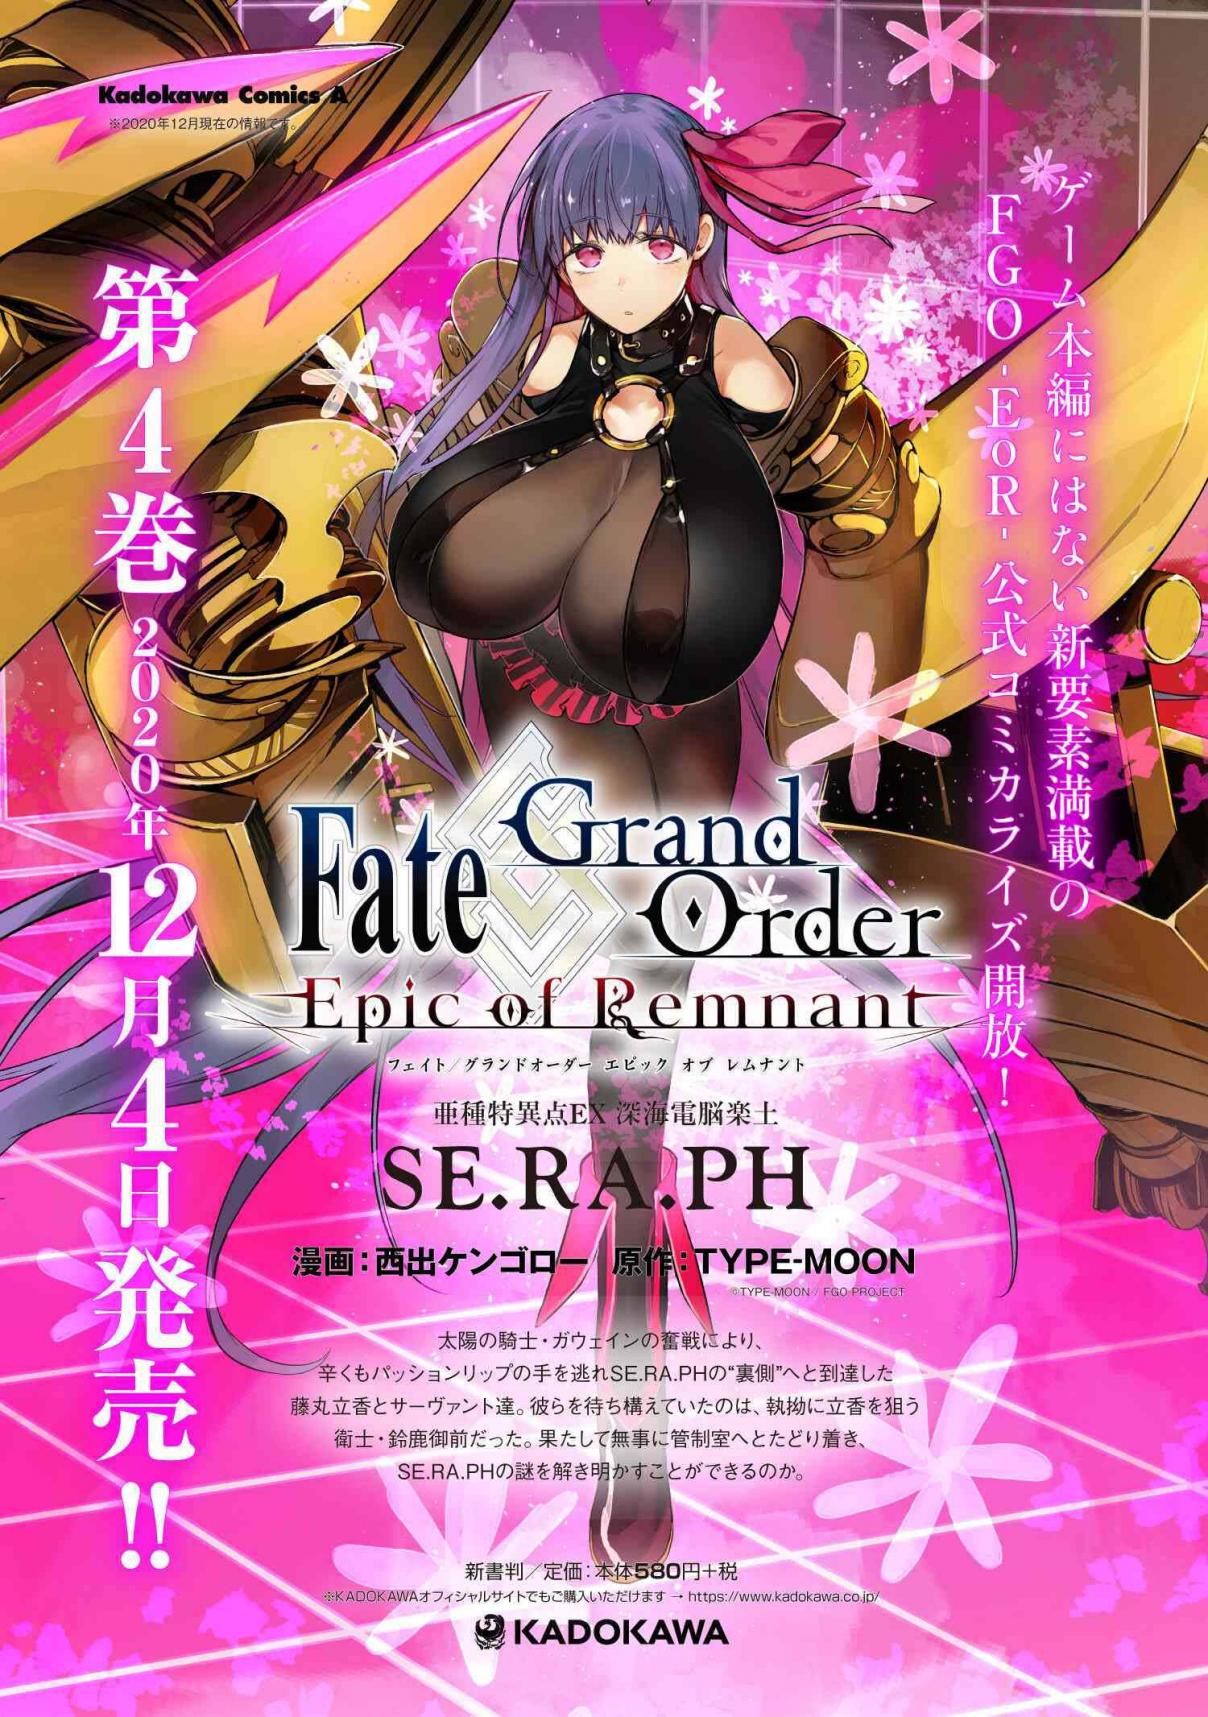 Fate/Grand Order -Epic of Remnant- Deep Sea Cyber-Paradise, SE.RA.PH 19.3